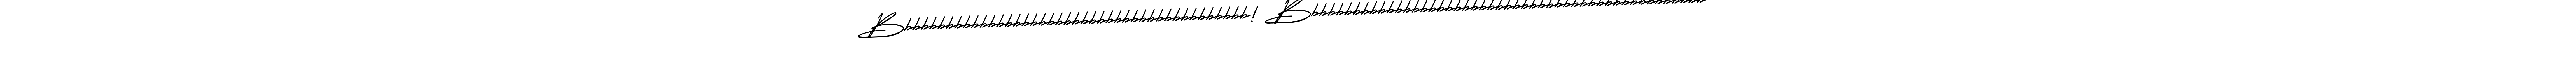 Make a beautiful signature design for name Bbbbbbbbbbbbbbbbbbbbbbbbbbbbbbbbbbbbbbbbbb! Bbbbbbbbbbbbbbbbbbbbbbbbbbbbbbbbbbbbbbbbbbbbbbbb. Use this online signature maker to create a handwritten signature for free. Bbbbbbbbbbbbbbbbbbbbbbbbbbbbbbbbbbbbbbbbbb! Bbbbbbbbbbbbbbbbbbbbbbbbbbbbbbbbbbbbbbbbbbbbbbbb signature style 3 images and pictures png